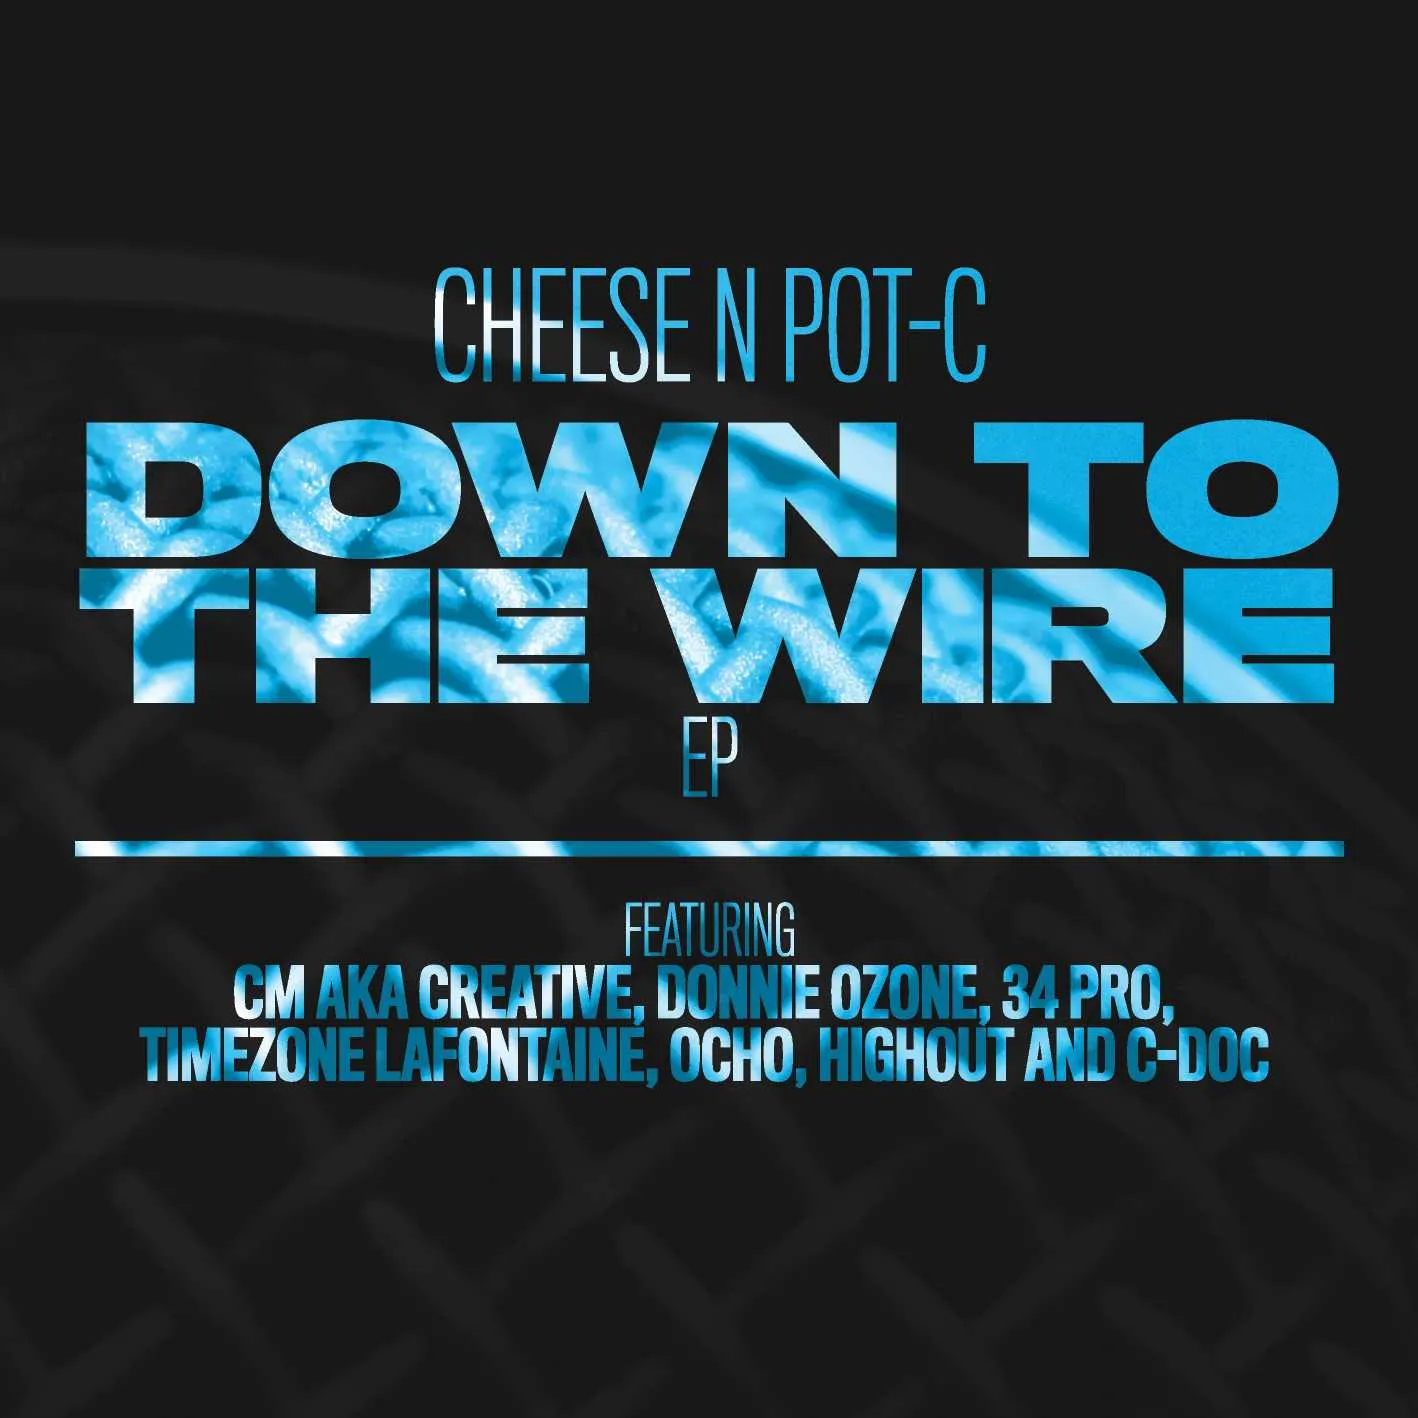 Album cover for “Down To The Wire EP” by Cheese N Pot-C